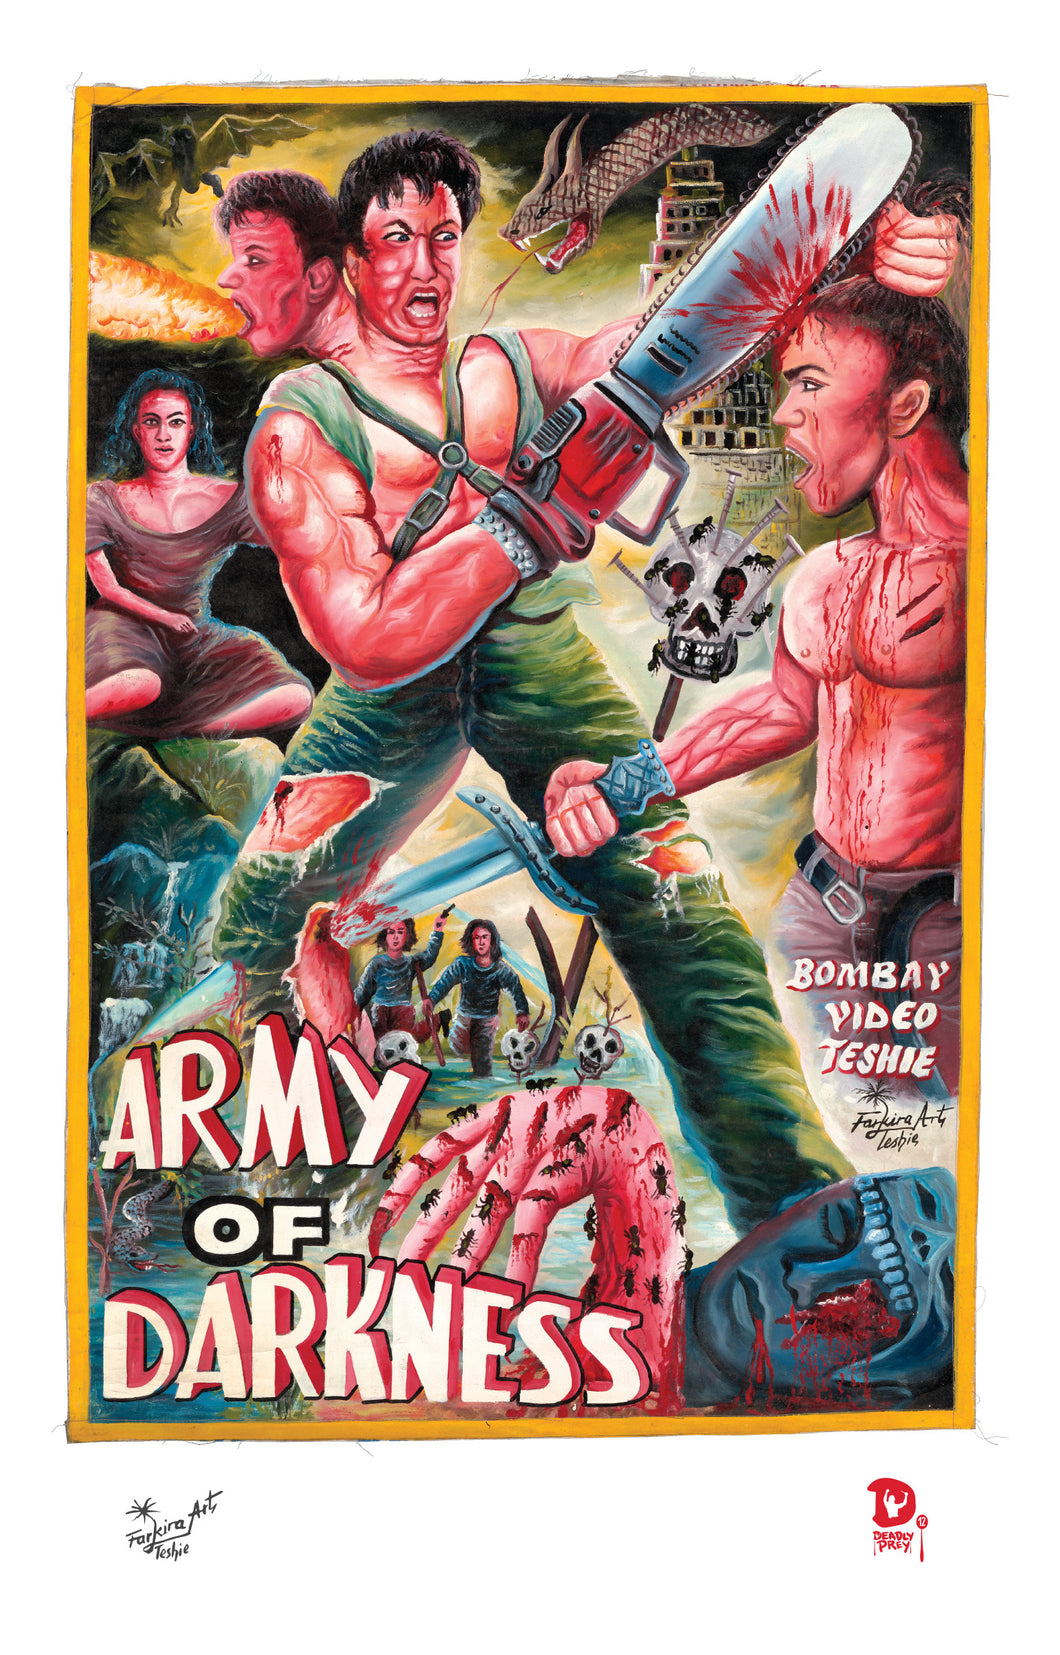 ARMY OF DARKNESS (High Quality Print) - Farkira